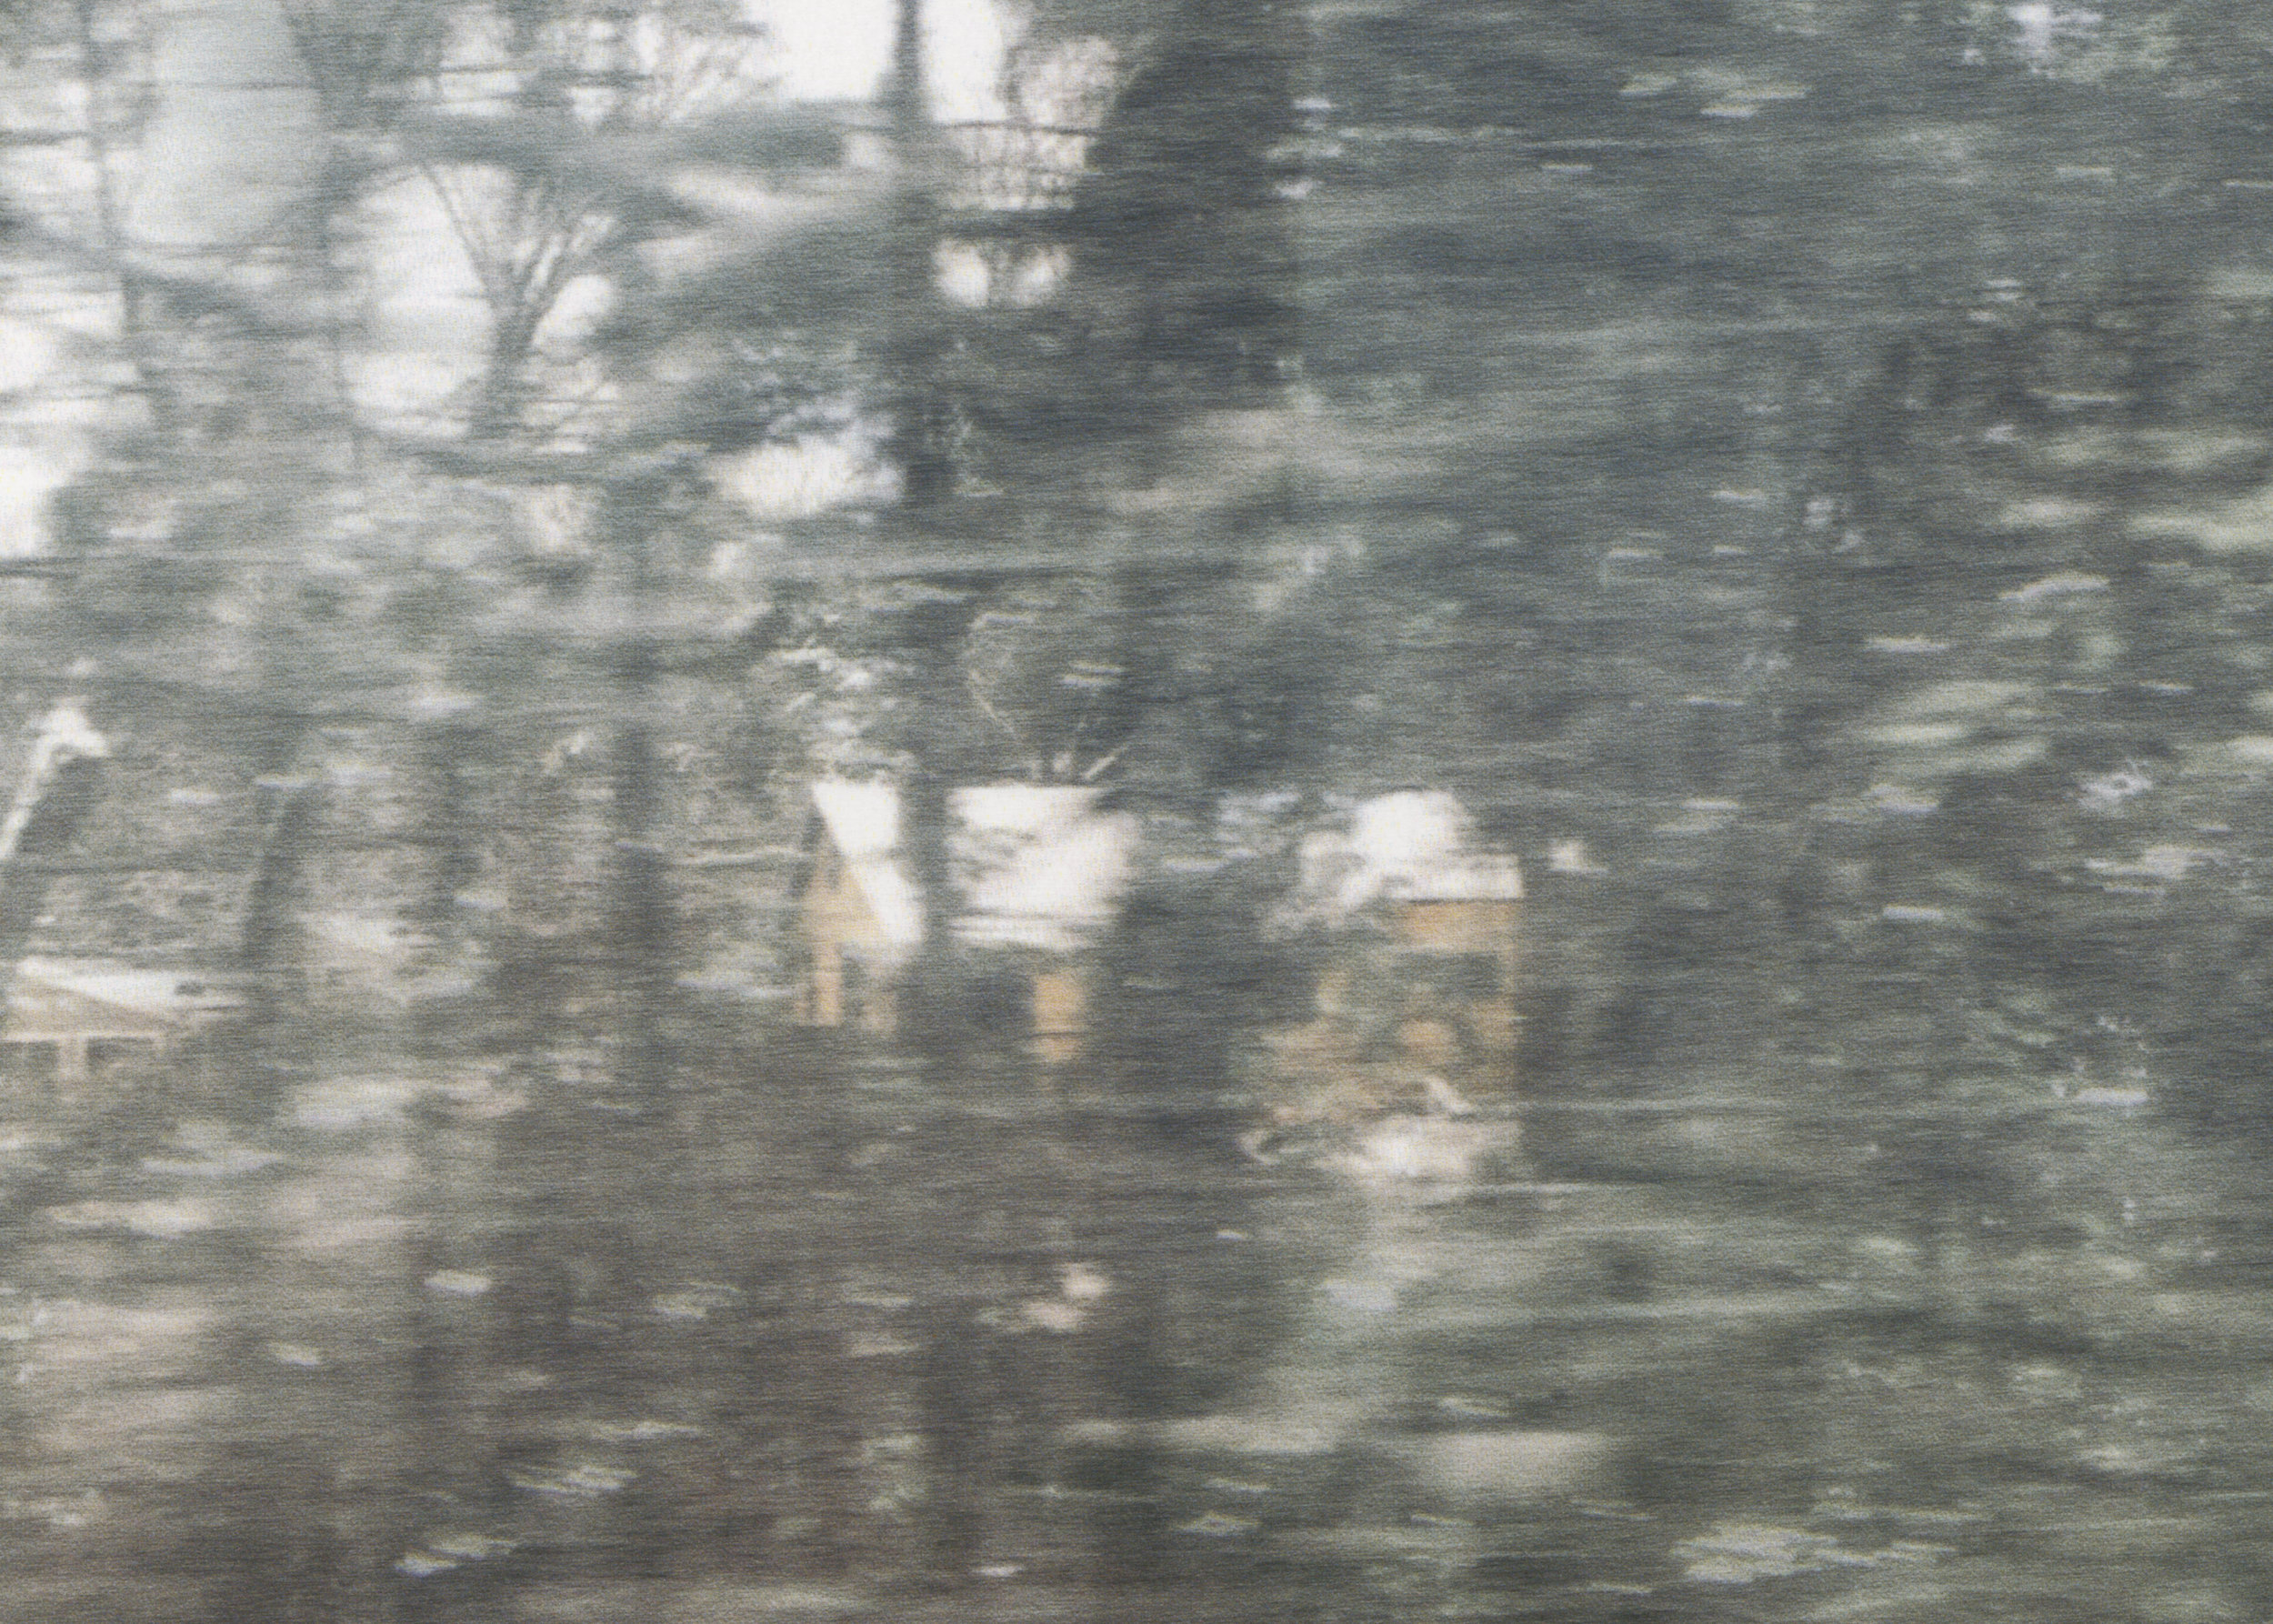   Untitled (glass, forest, house)  (detail), pigment print on paper, sheet: 98.1 × 72 cm (38 5/8 × 28 3/8 in), framed: 109 × 82.4 cm (42 7/8 × 32 1/2 in), 2019 